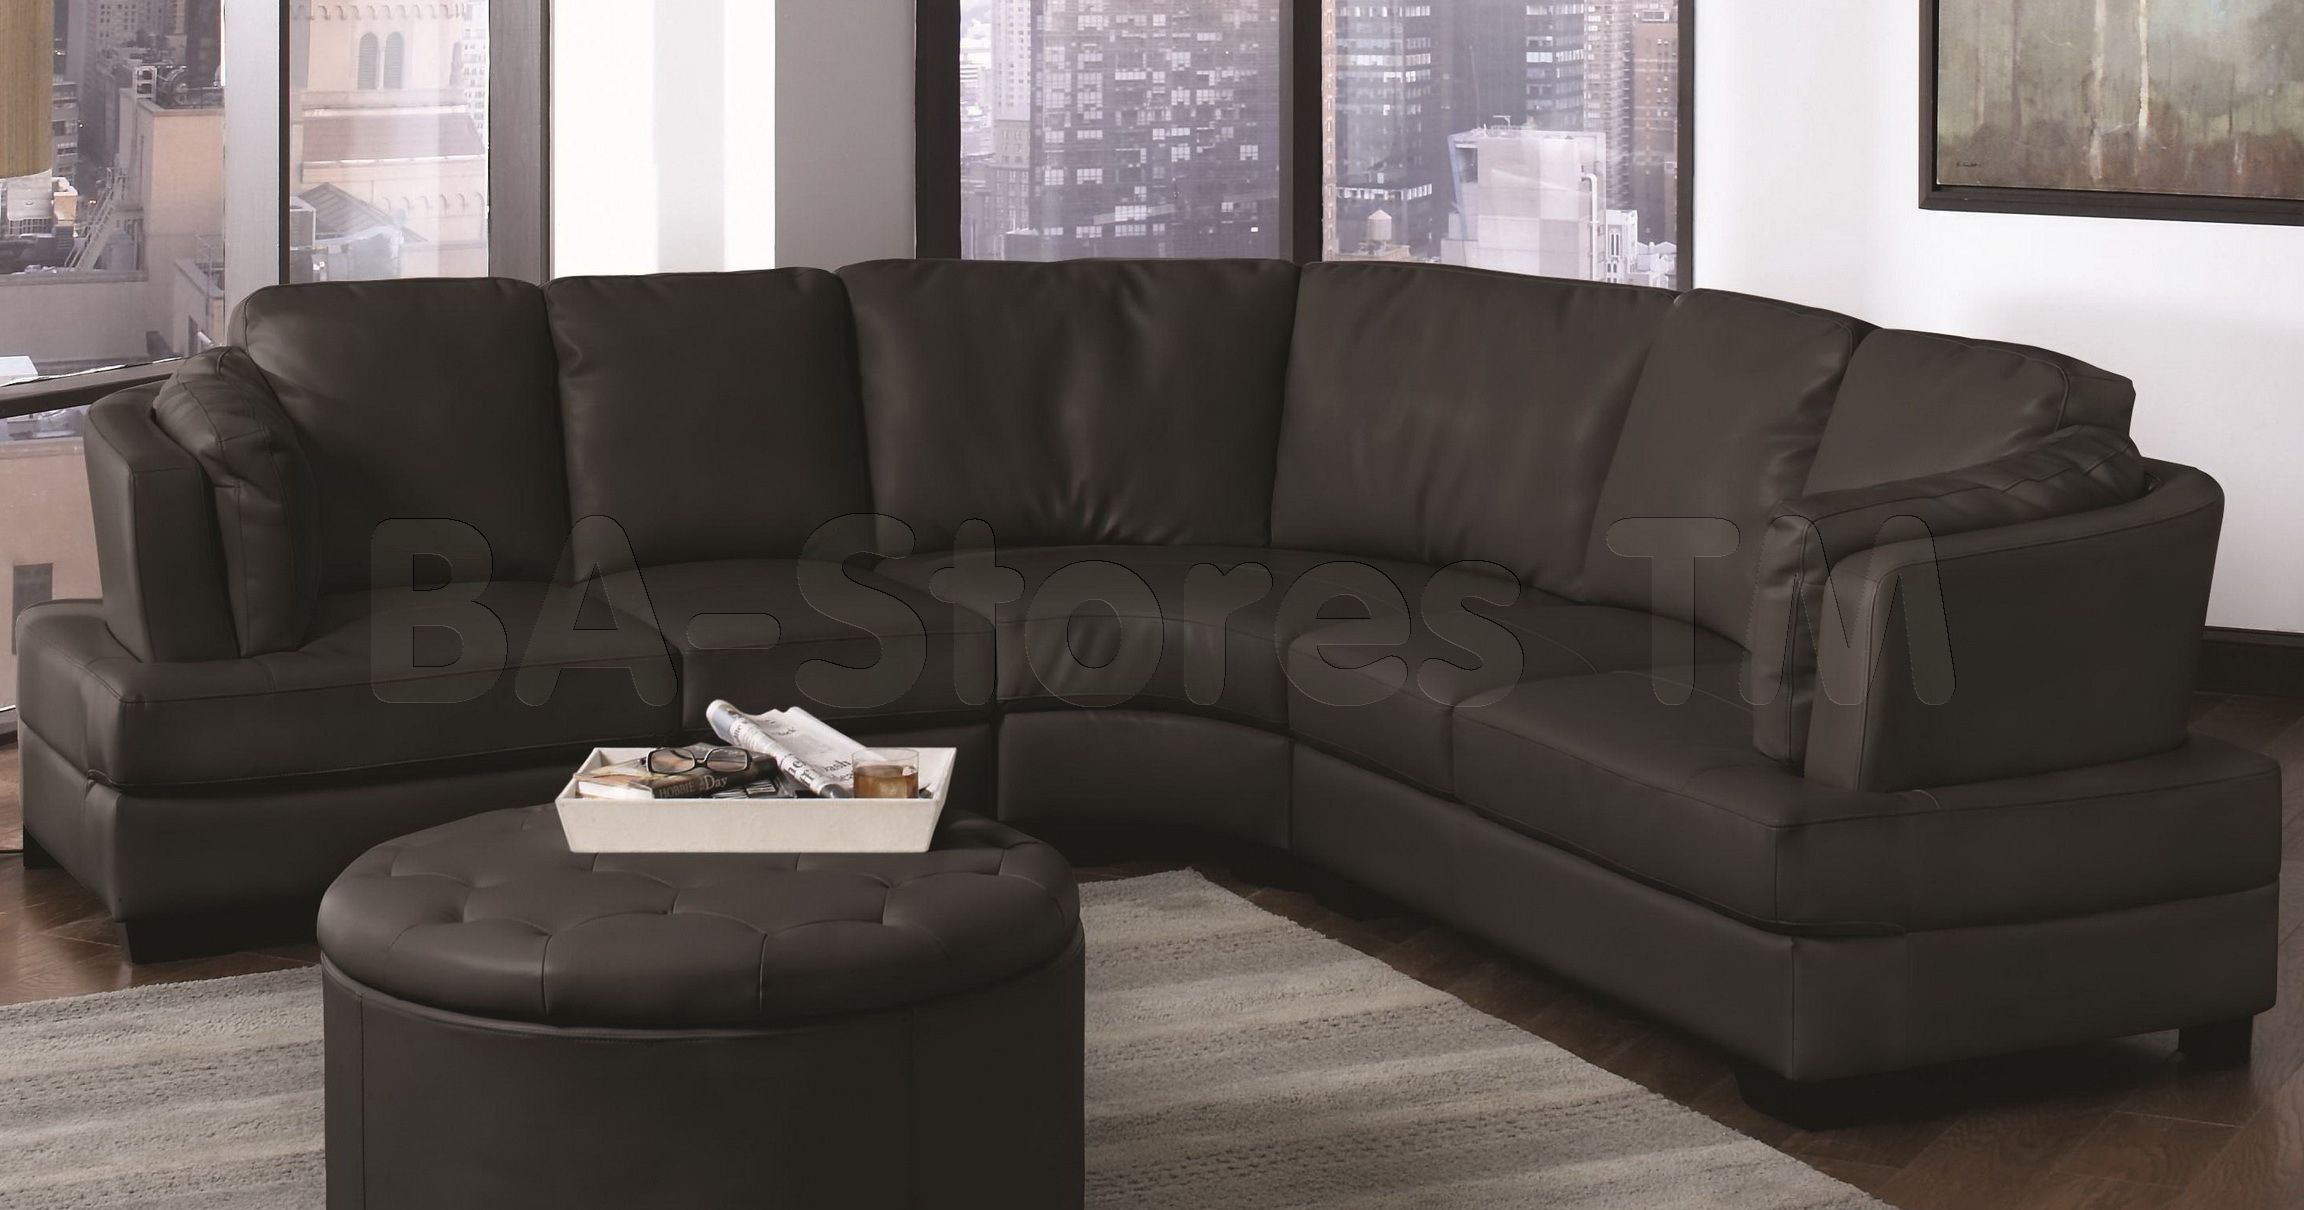 Trend Curved Sectional Sofa 99 On Contemporary Sofa Inspiration With In Rounded Sofas (View 6 of 10)